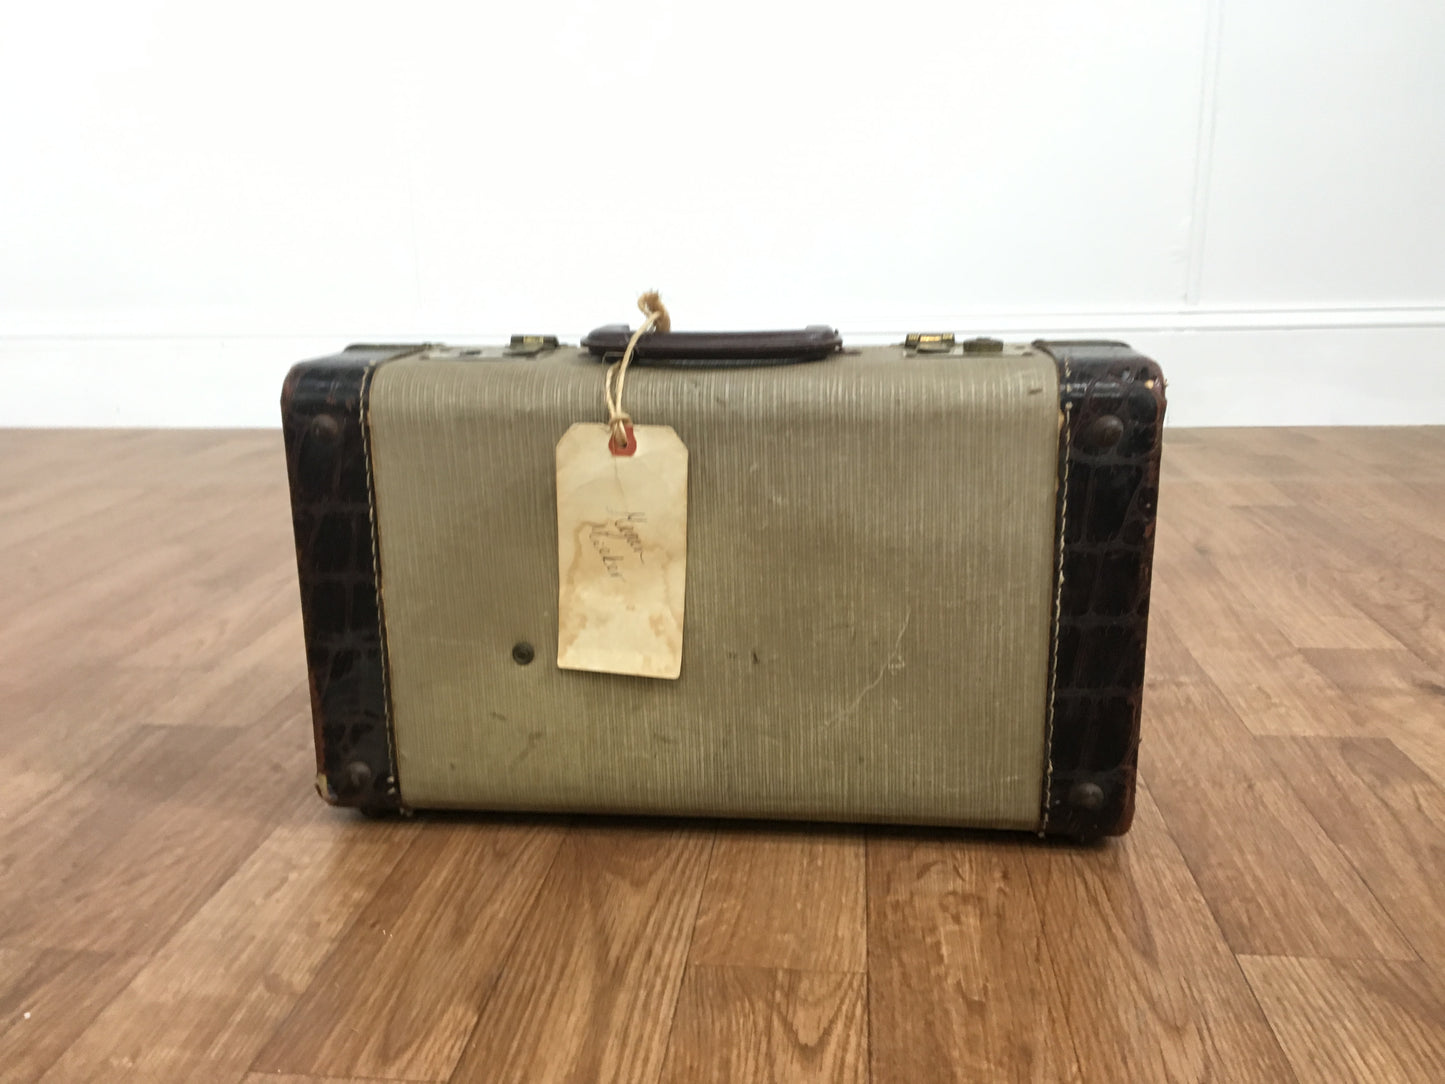 VINTAGE LUGGAGE, FADED GREEN